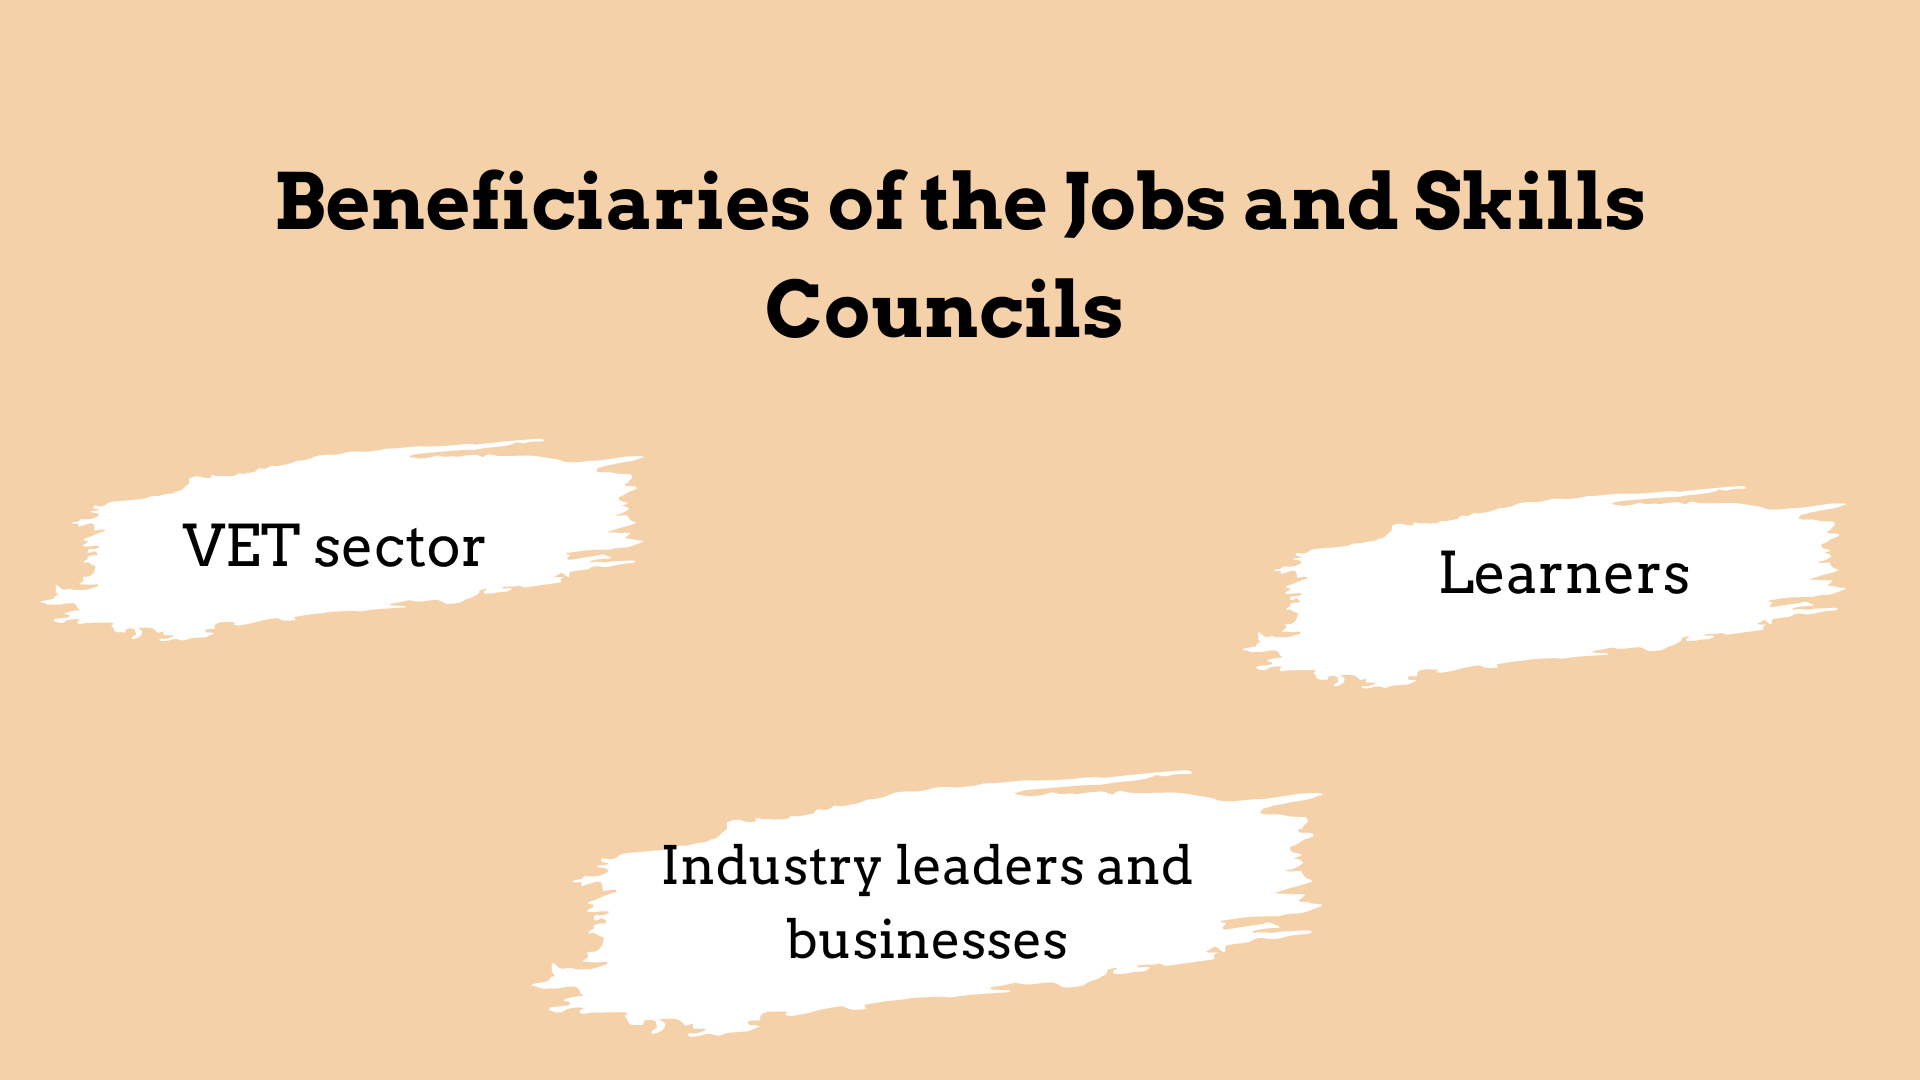 Who will the beneficiaries of the Jobs and Skills Councils